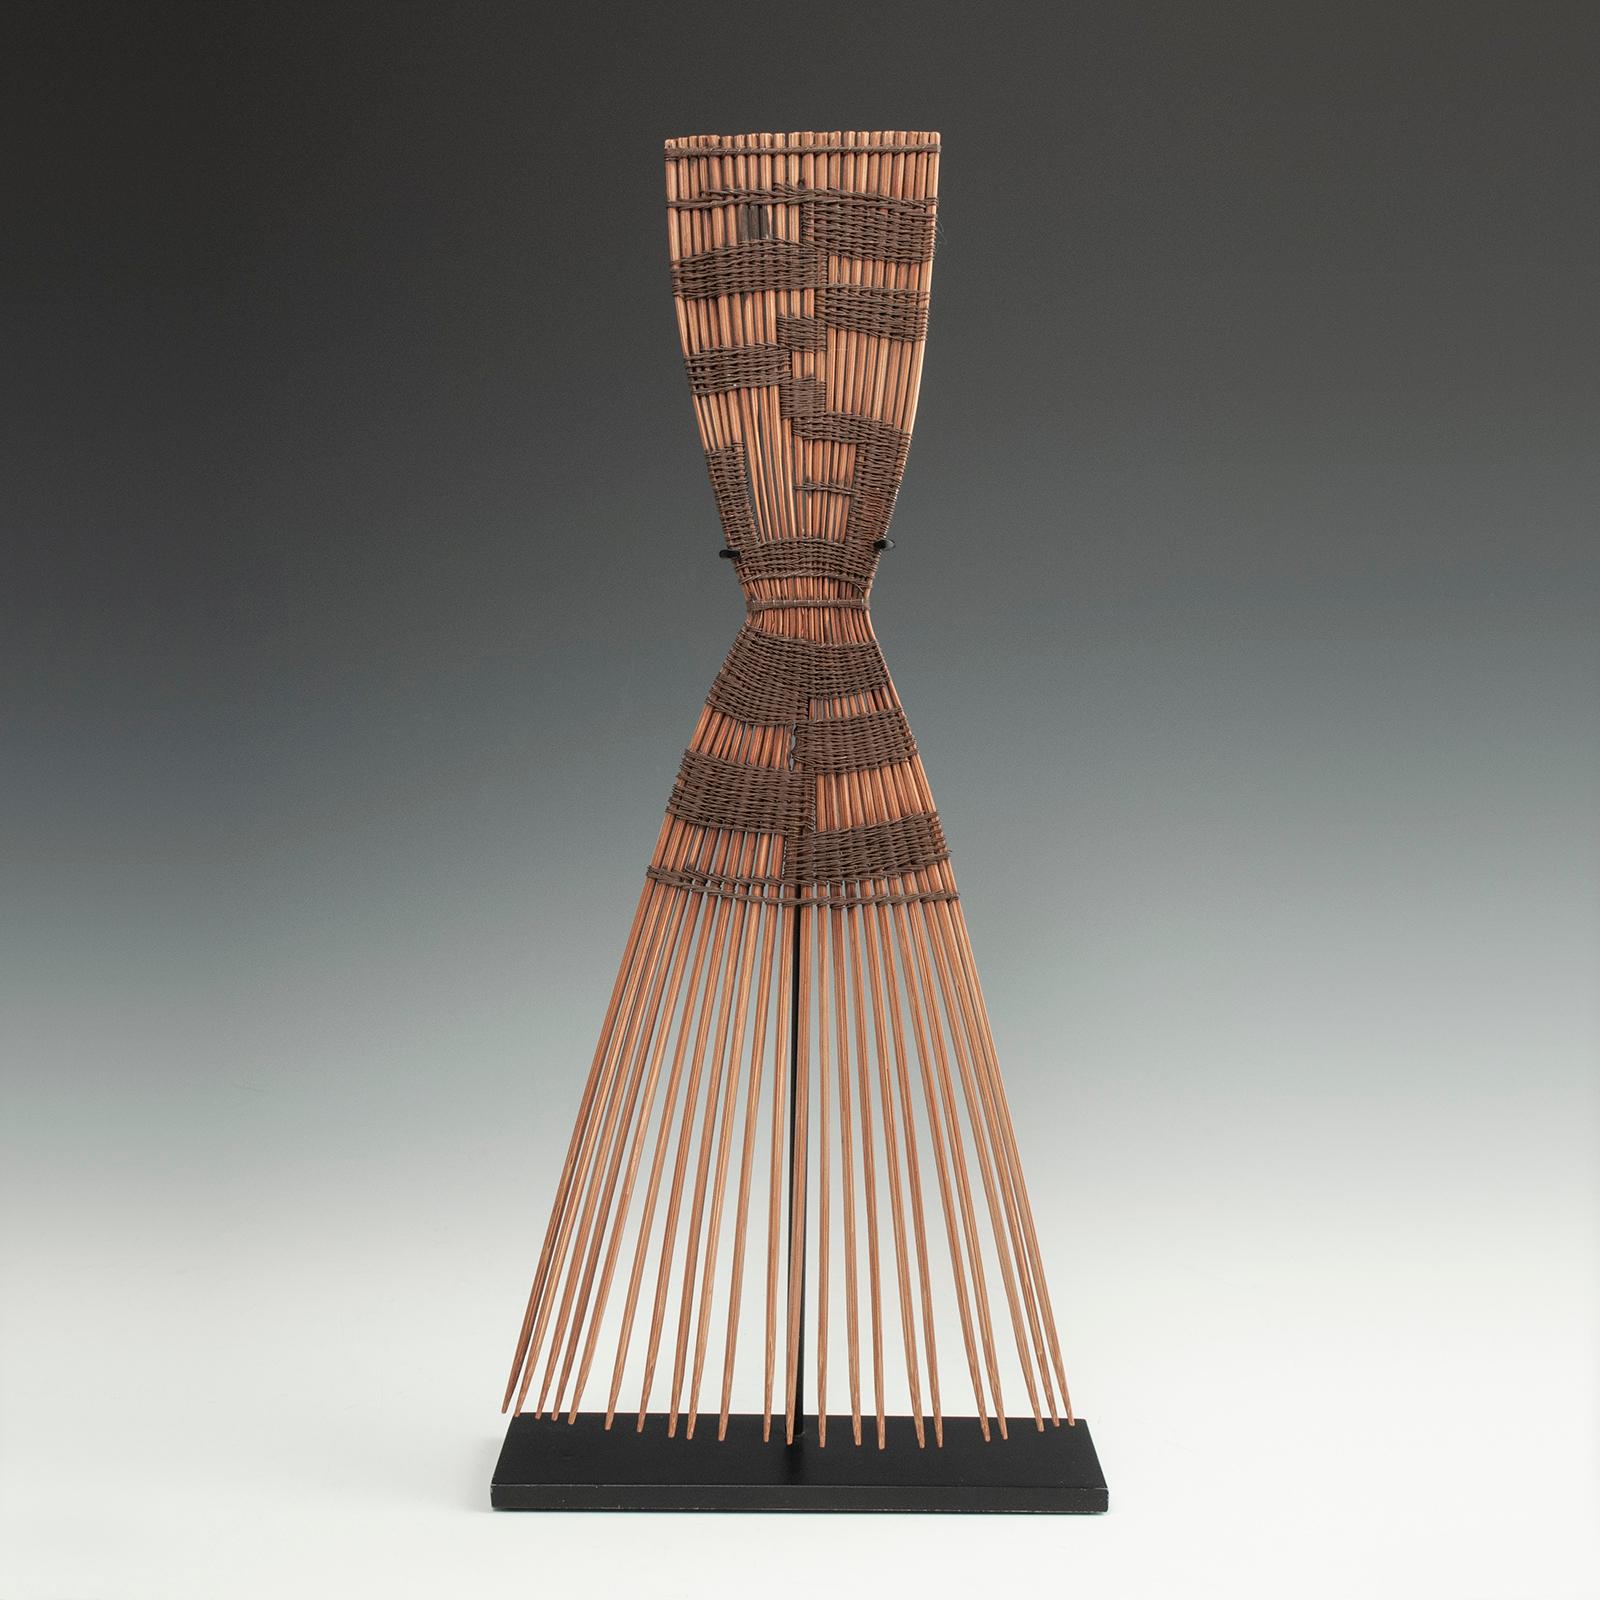 Ceremonial comb, Luba People, Zaire, D. R. Congo

Made of palm leaf midribs, this large, graphic comb has a pinched waist and is held together with finely wrapped wire. Presented on a custom base, it is a striking example of its type. Measures